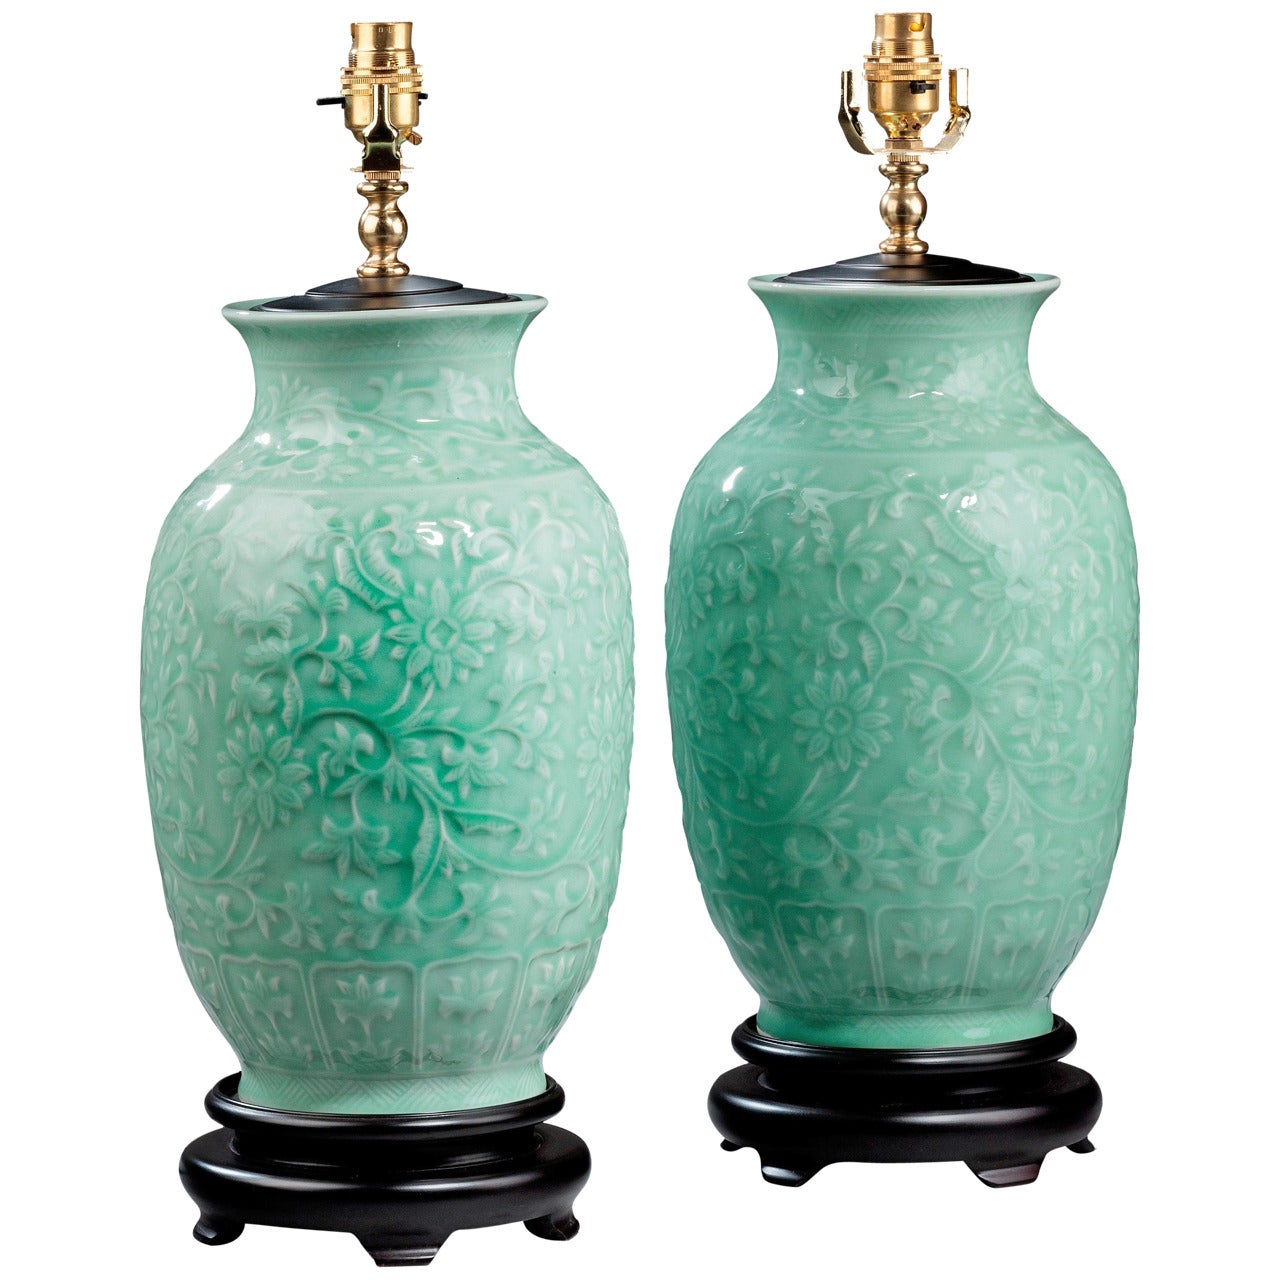 Pair of 20th century Celadon Green Ovoid Lamps